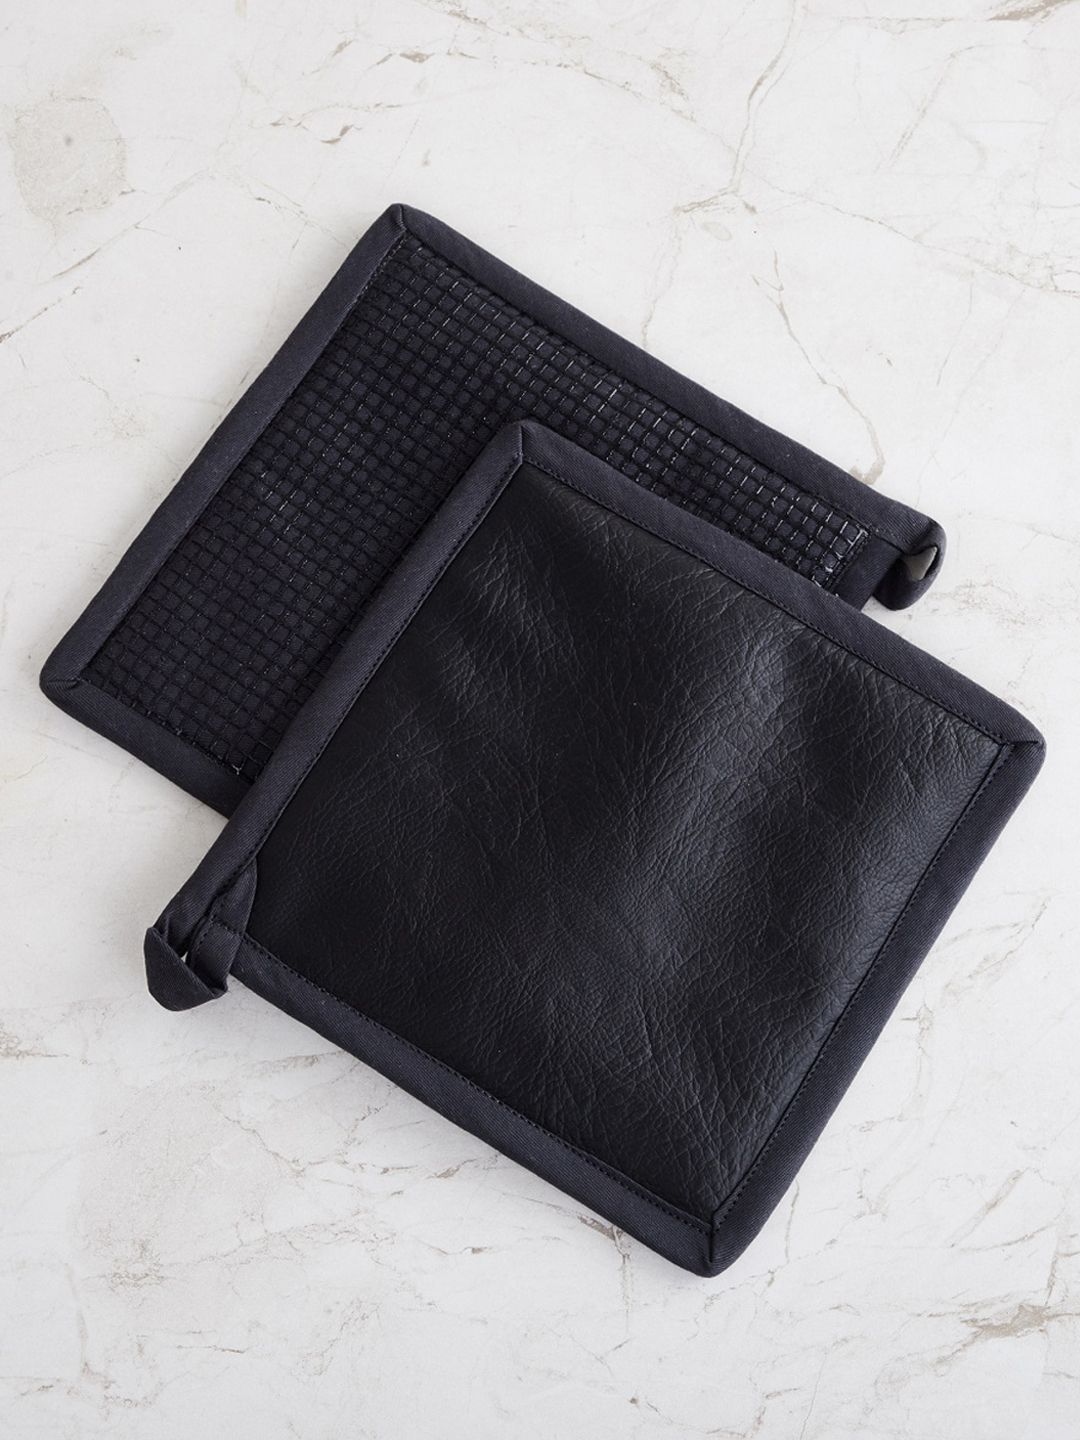 Home Centre Set of 2 Black Leather Textured Kitchen Pot Holder Price in India